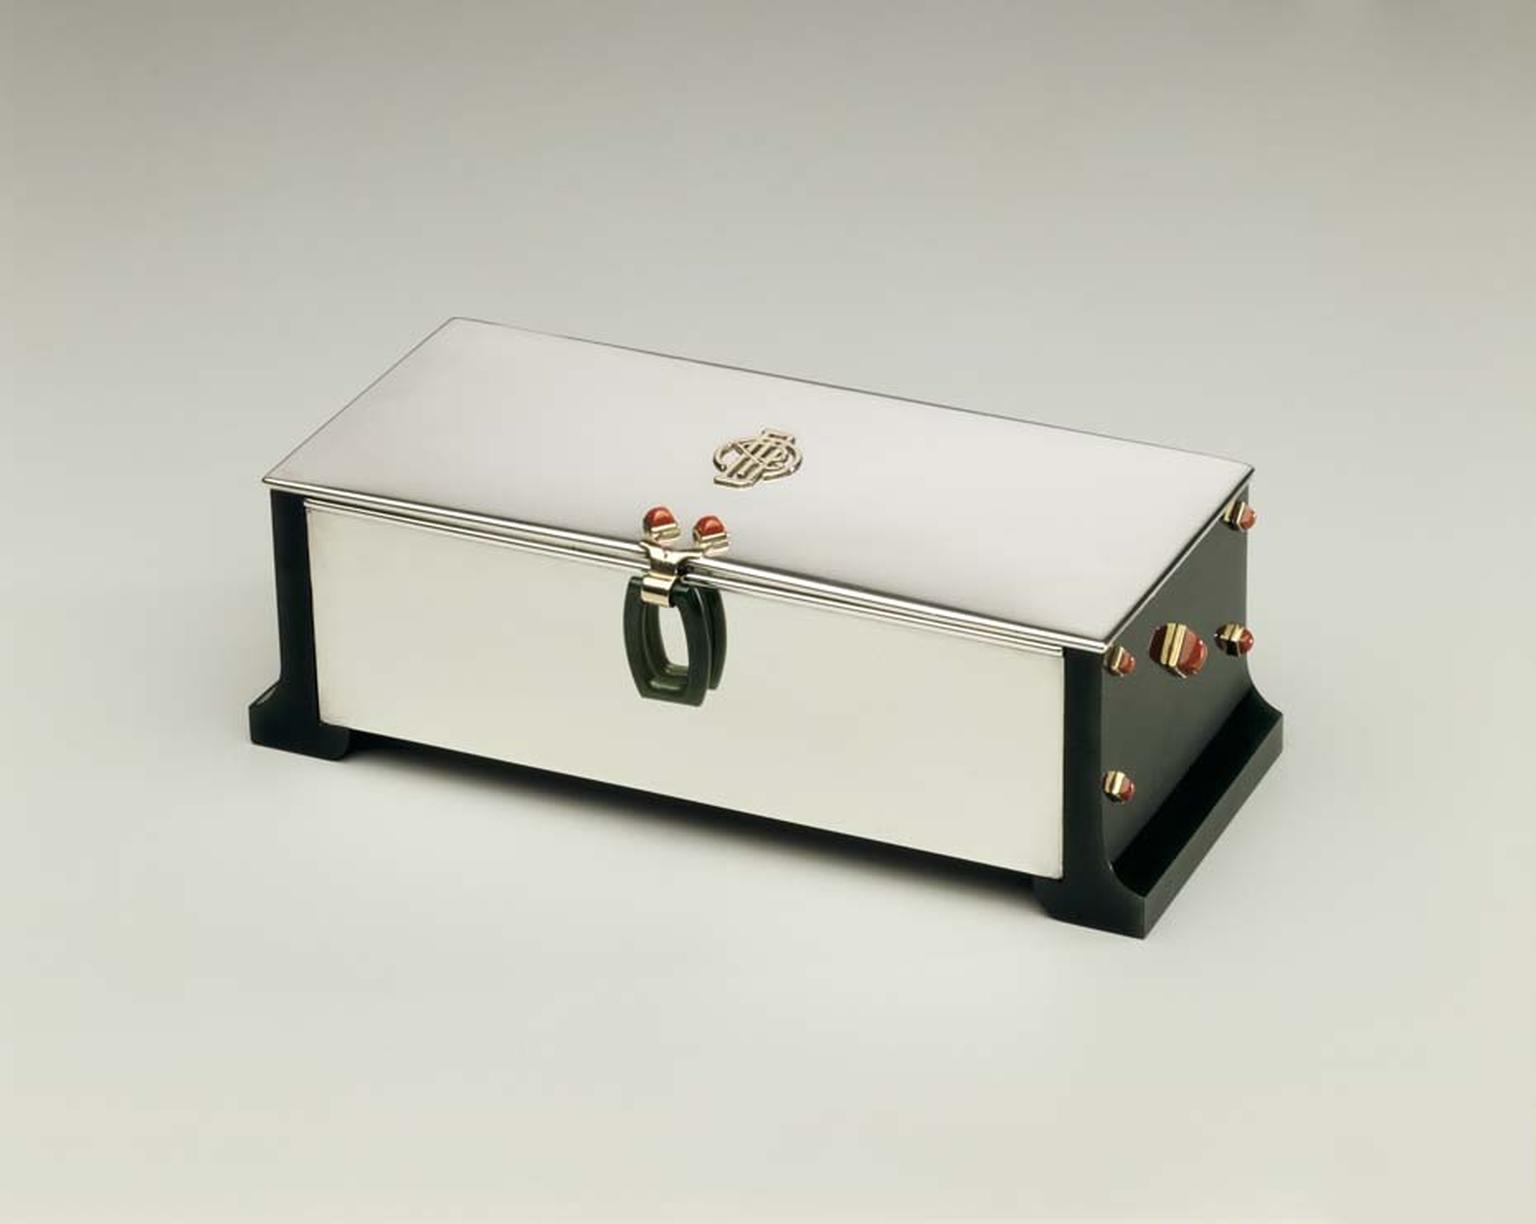 Cartier 1935 Monogrammed Box with silver, jade and coral. Image: Courtesy Hillwood Estate, Museum and Gardens